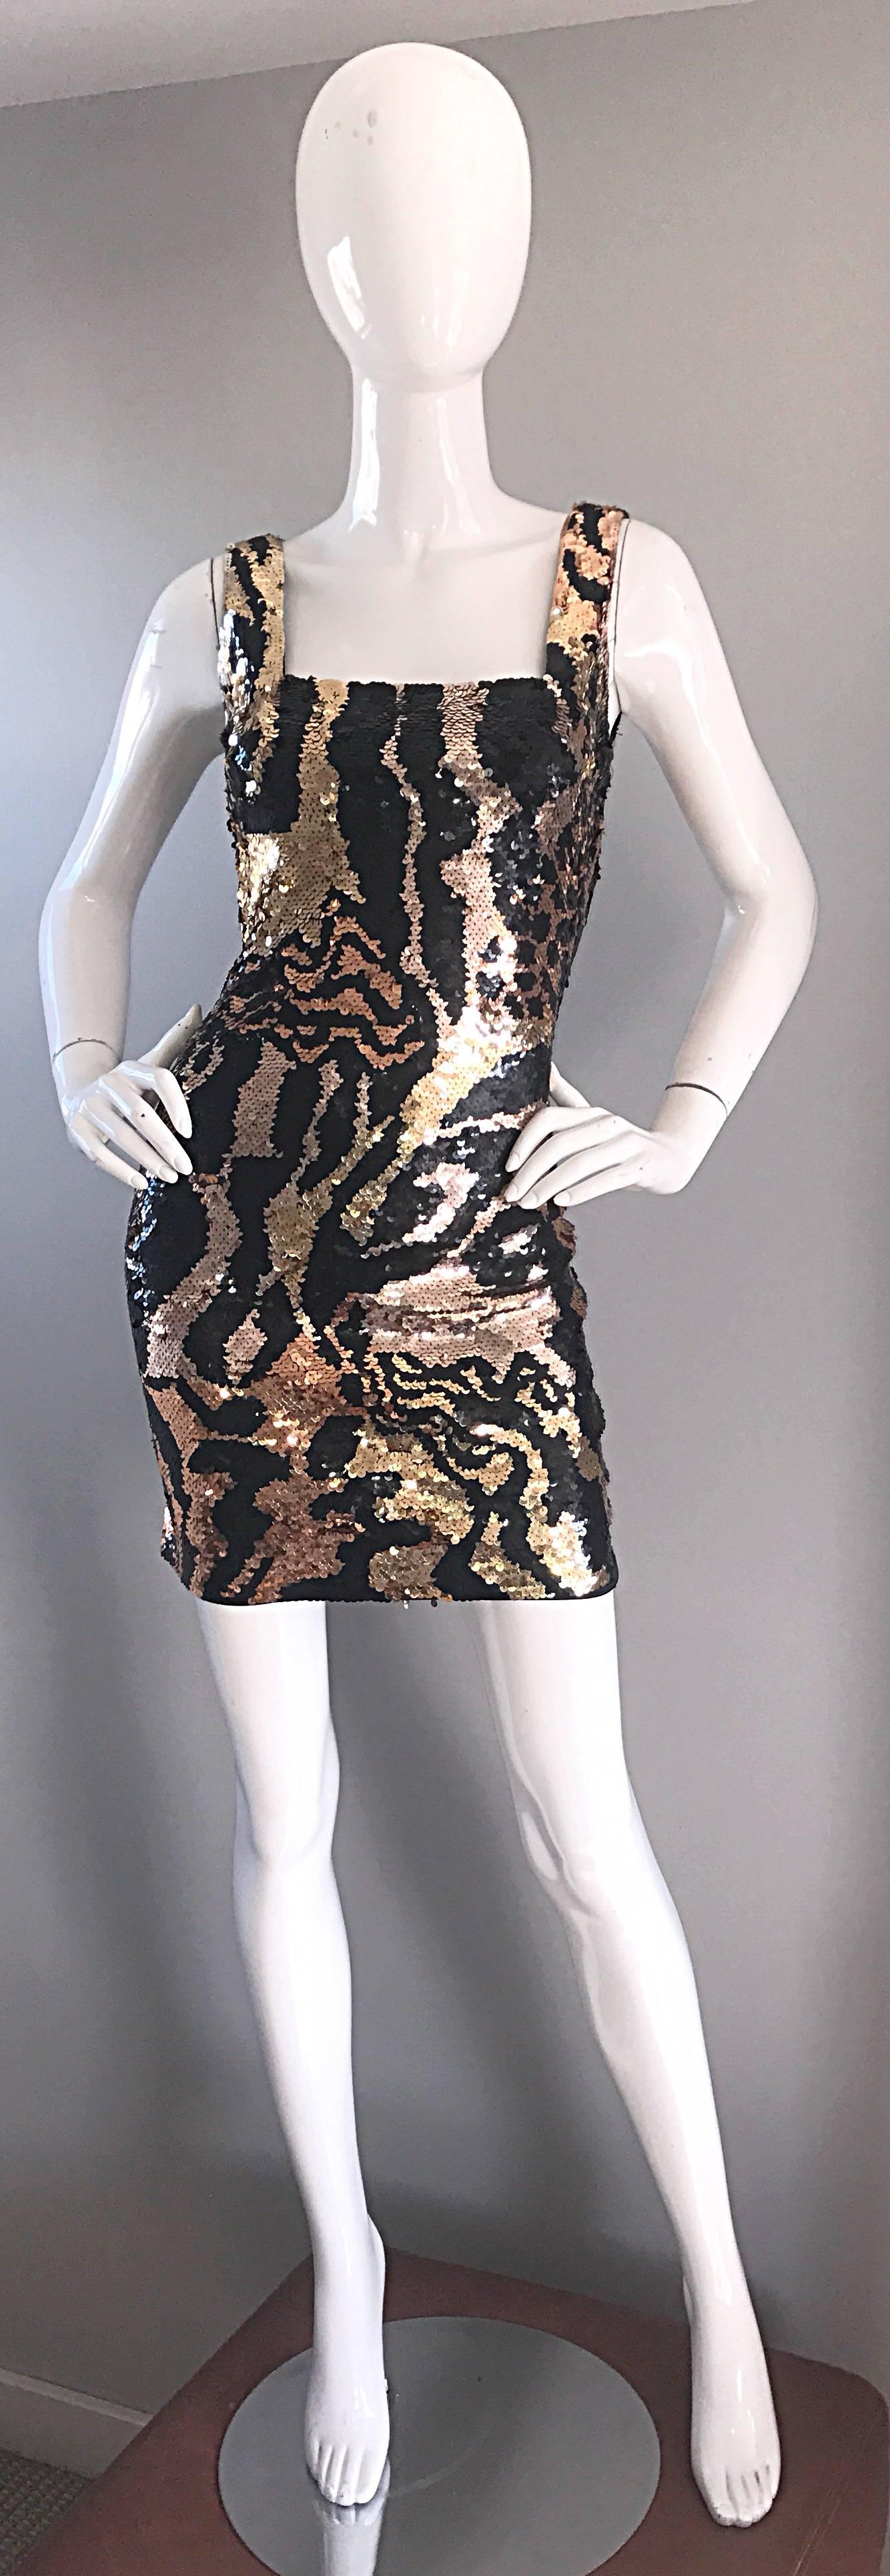 Sexy vintage 1990s OLEG CASSINI black, gold, and rose gold bronze bodcon mini dress! Features thousands of hand-sewn sequins with abstract animal prints in zebra, leopard, and tiger throughout. Flattering bodycon fit stretches to fit, and looks